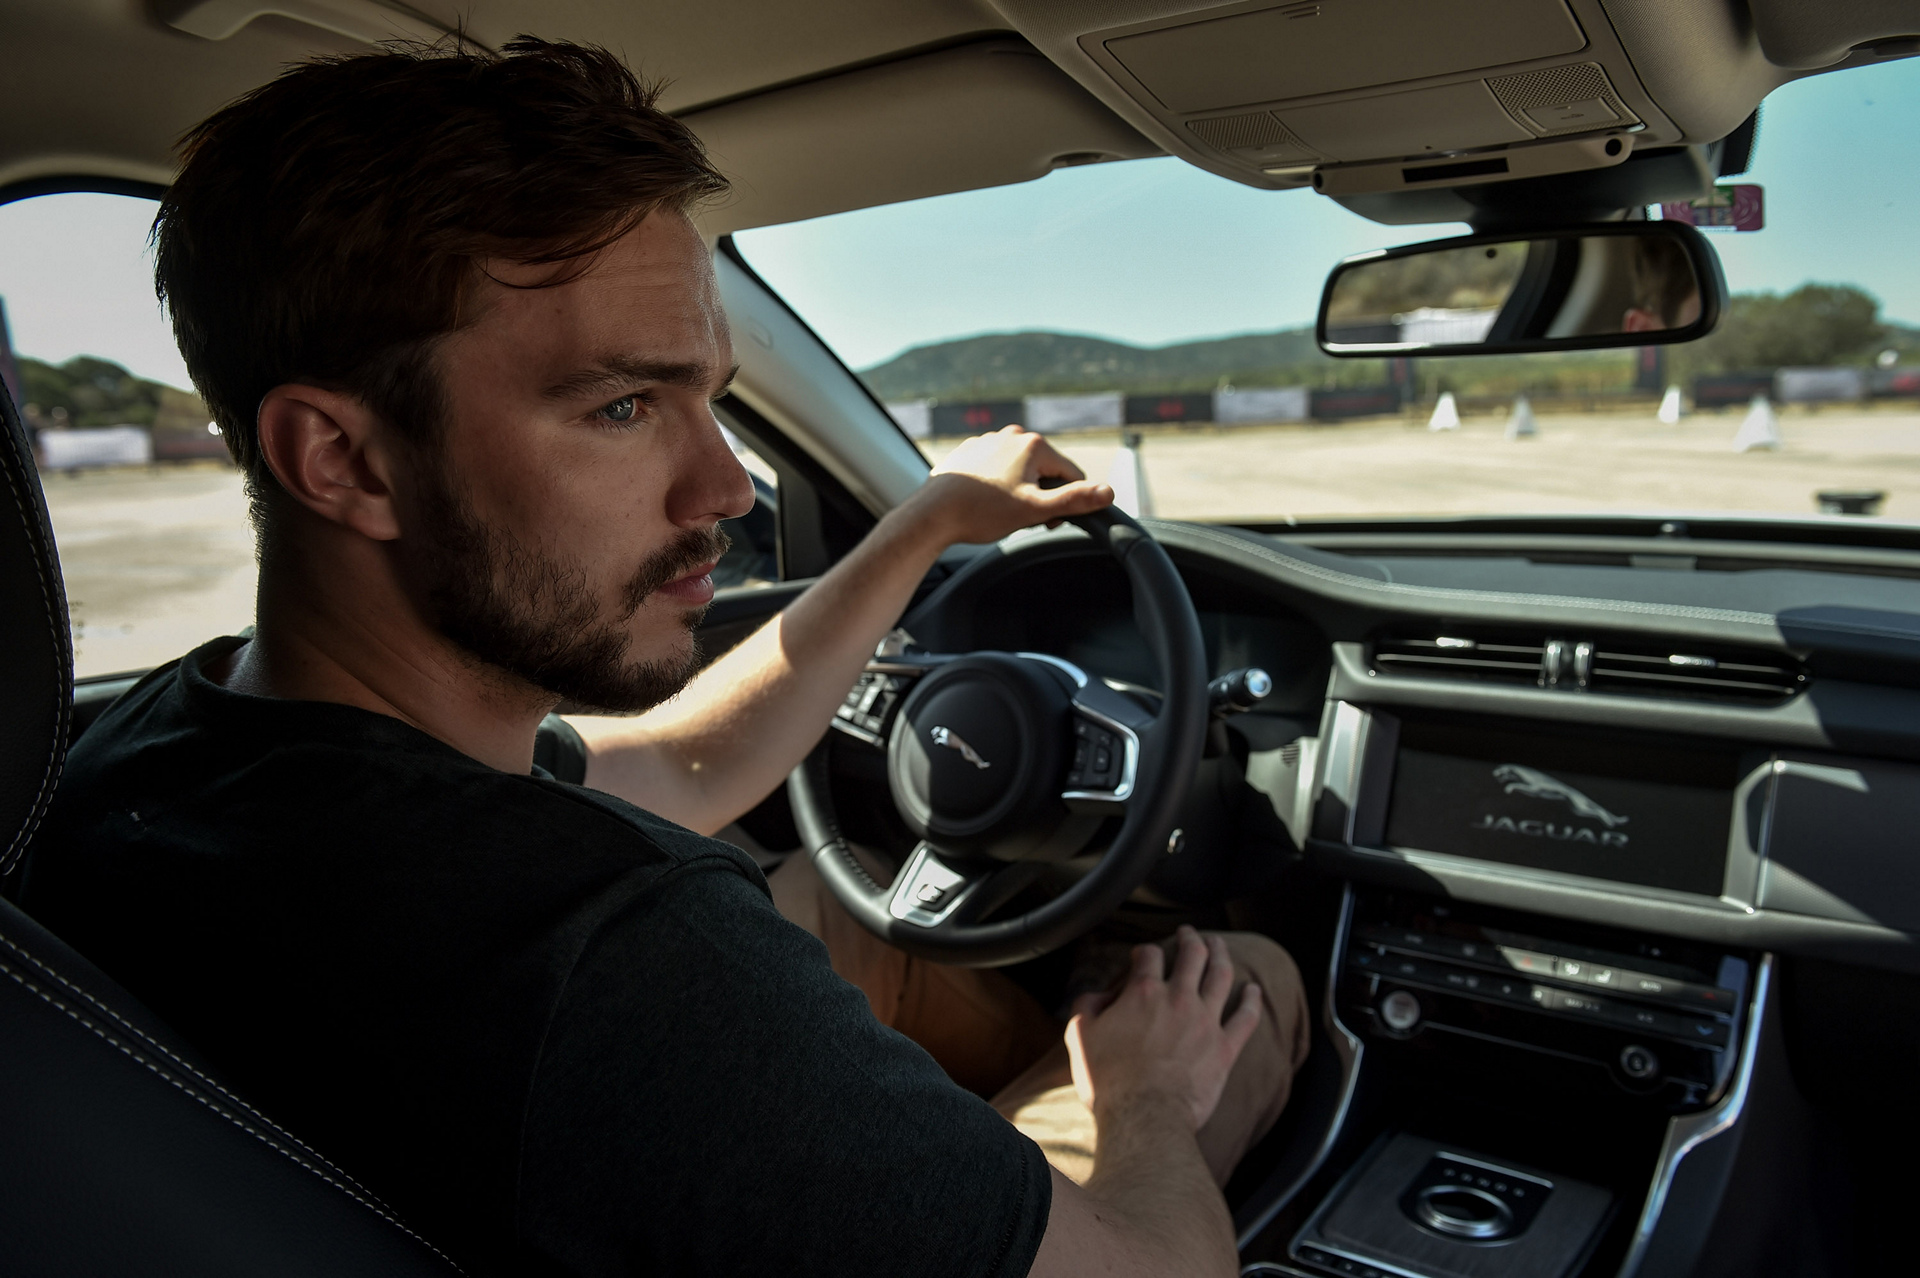 Nicholas Hoult Takes on Unique Driving Challenge in New Jaguar XF © Tata Group